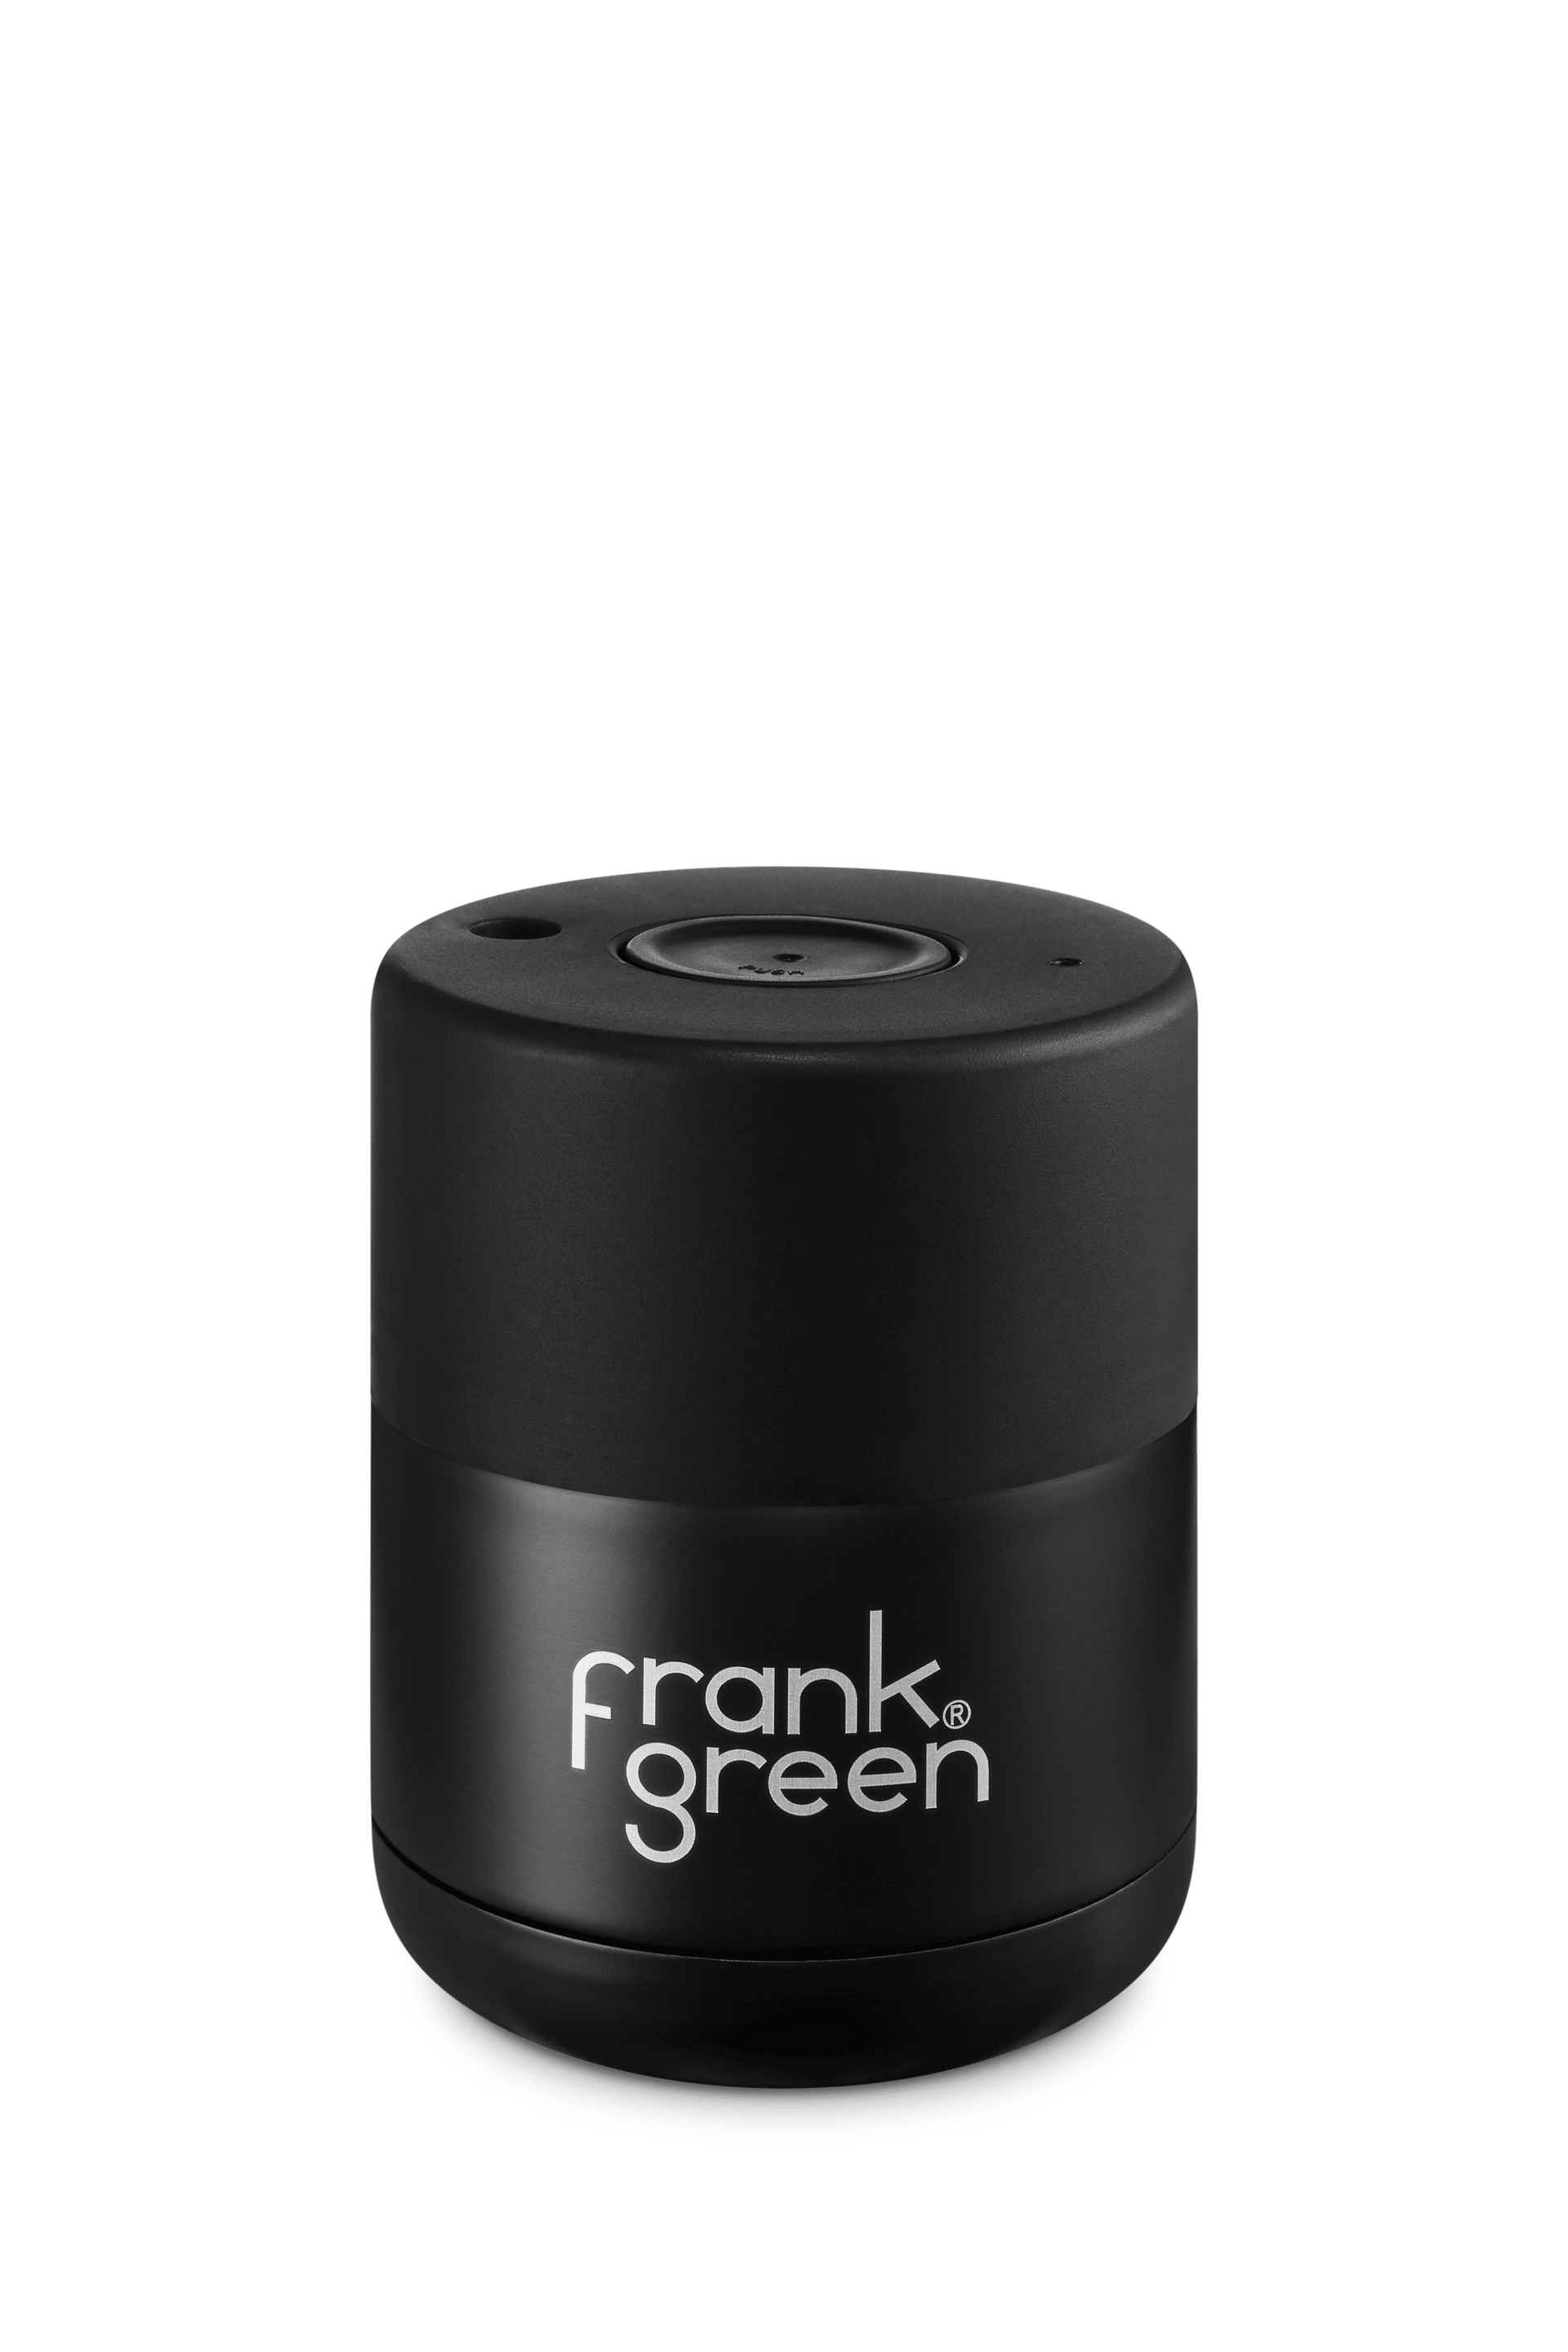 reusable coffee cup | best reusable coffee cup | frank green keep cup | reusable cup | glass keep cup | reusable coffee cups with lids | eco coffee cup | coffee cup | keep cup australia | coffee glass | reusable coffee mug | frank green ceramic cup | ceramic keep cup | frank green travel mug | glass reusable coffee cup | reusable travel mug | cups coffee | frank green ceramic | Upcycle Studio